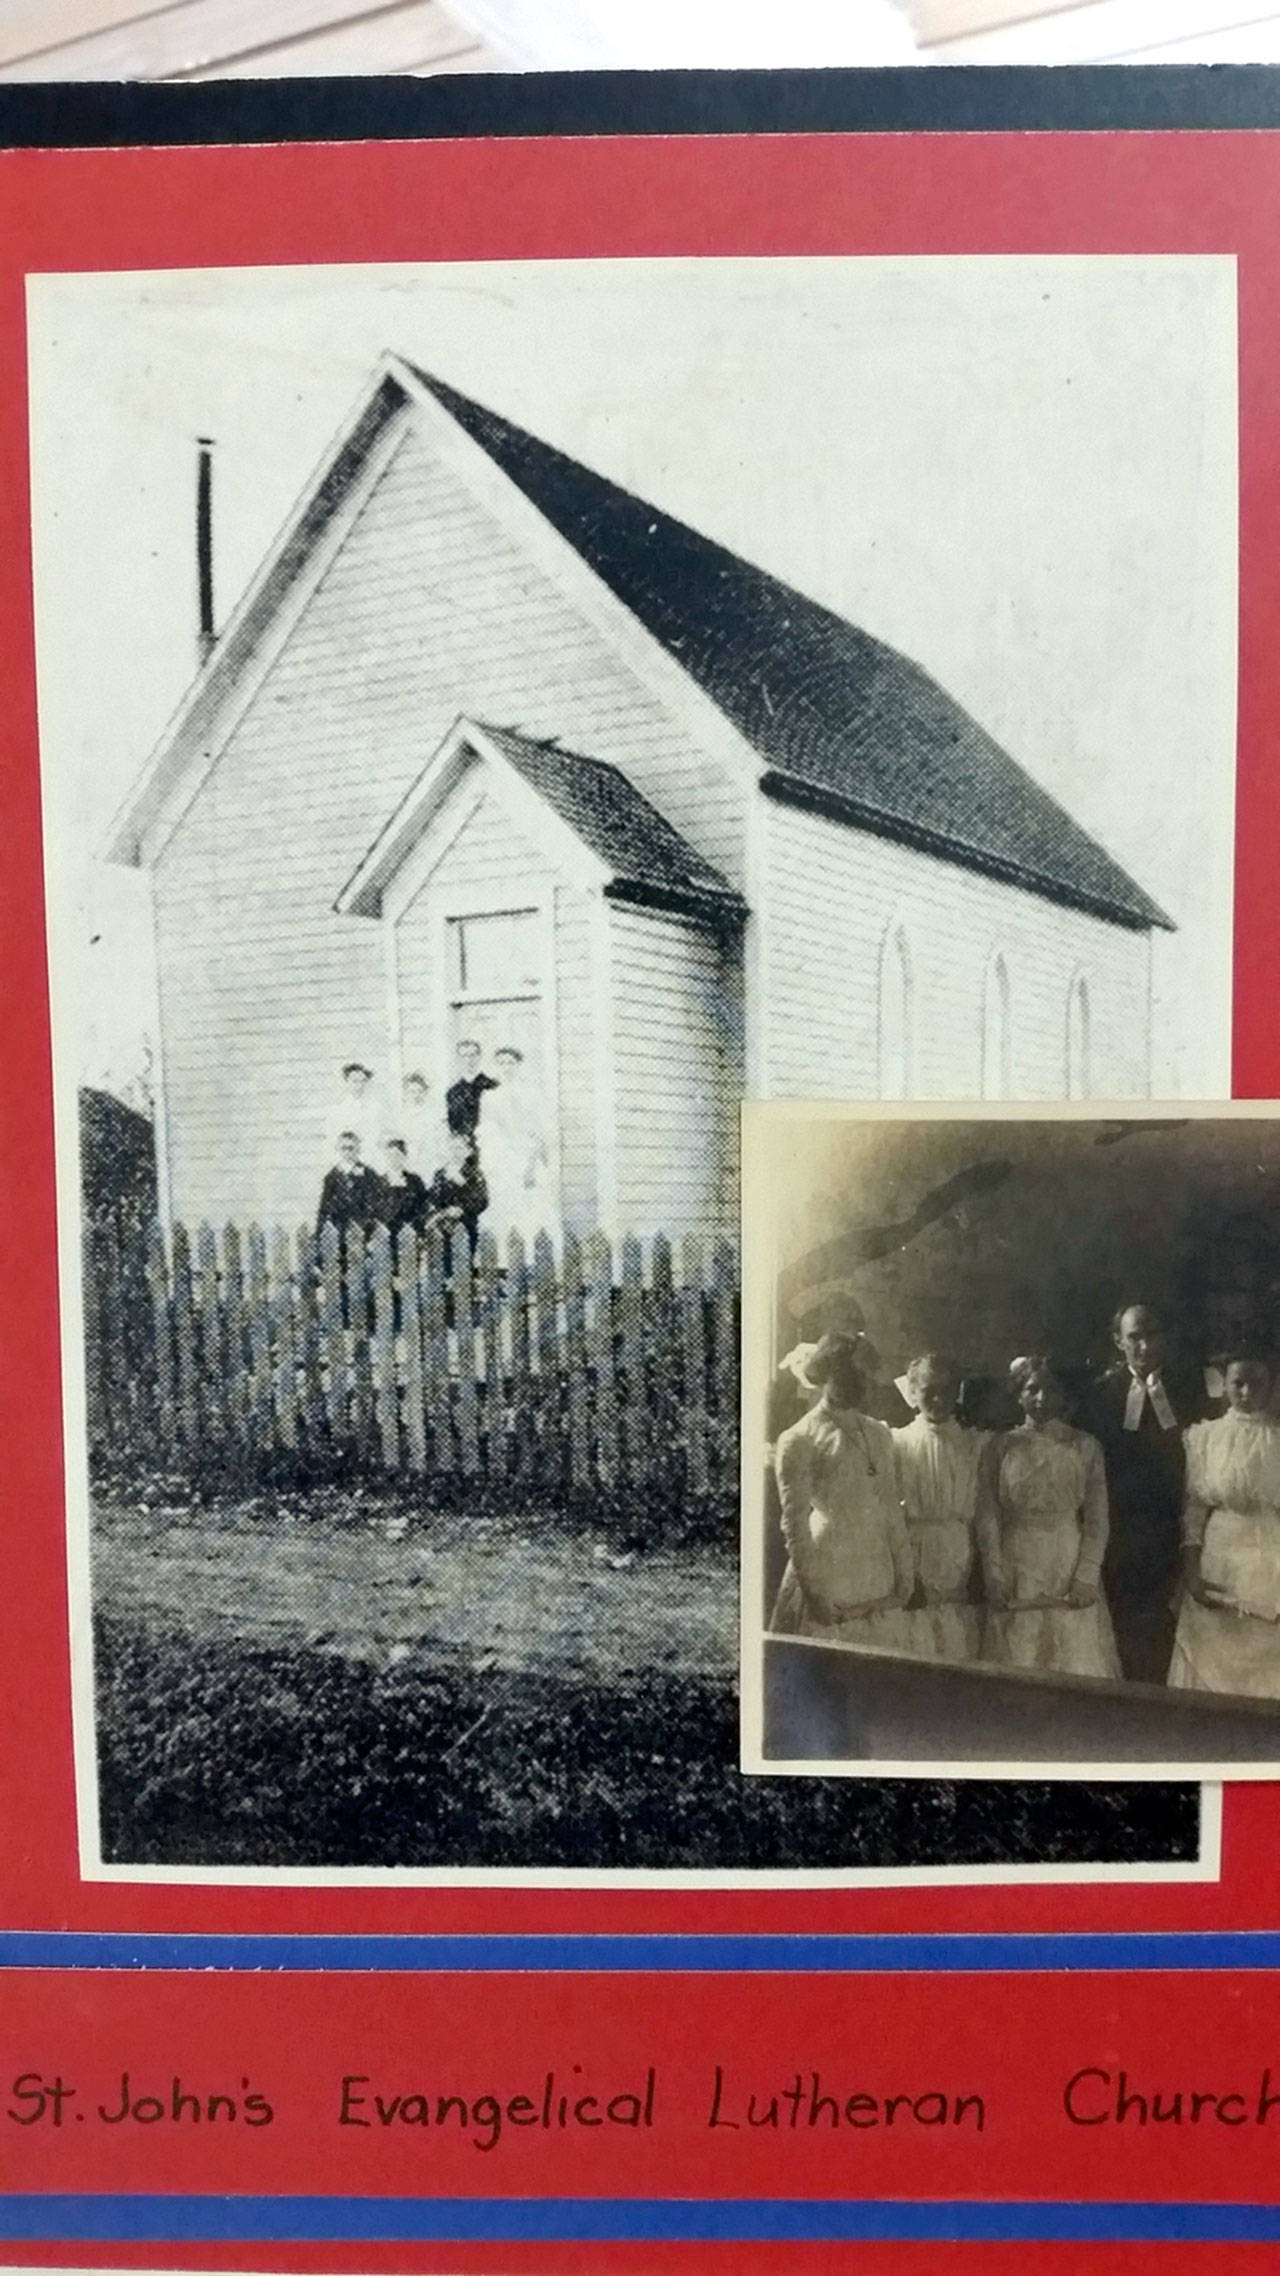 Open house set Sept. 6 to celebrate church’s 125th year